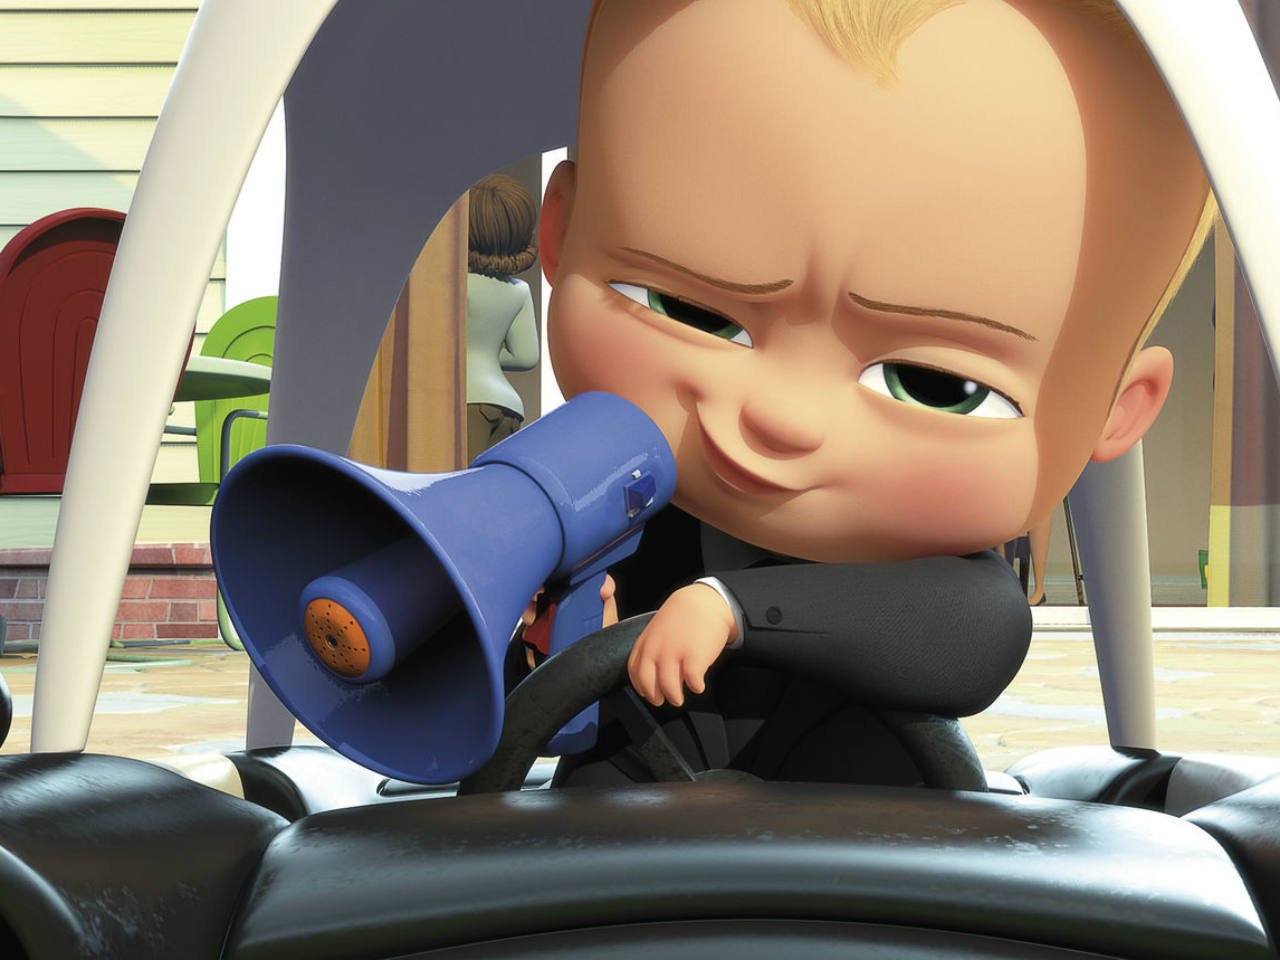 A still from the kids' movie The Boss Baby